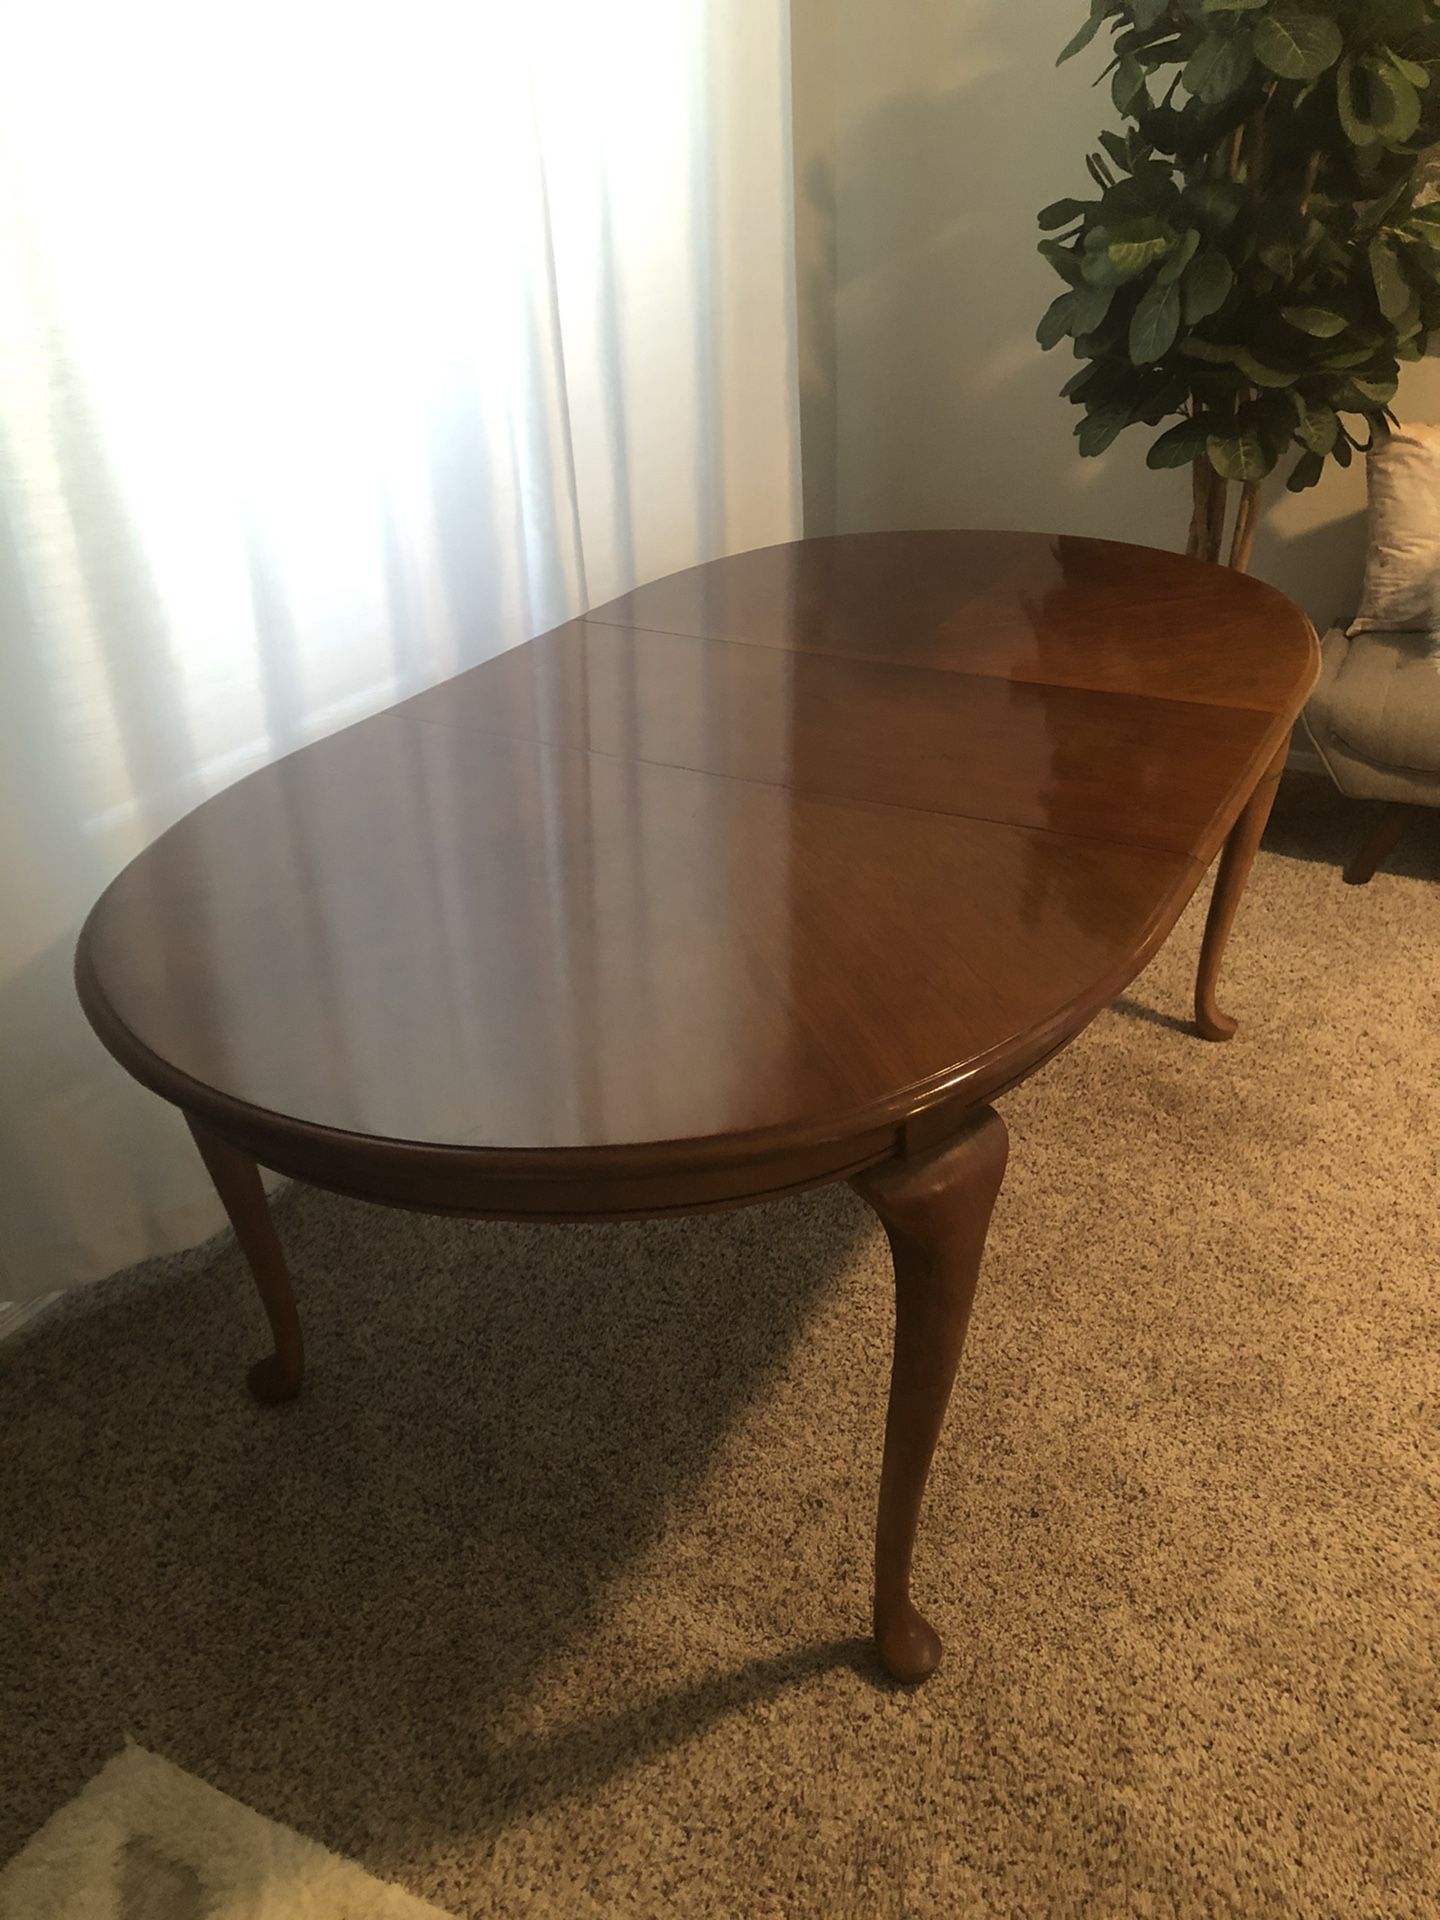 Gorgeous dining table - can seat 4-8